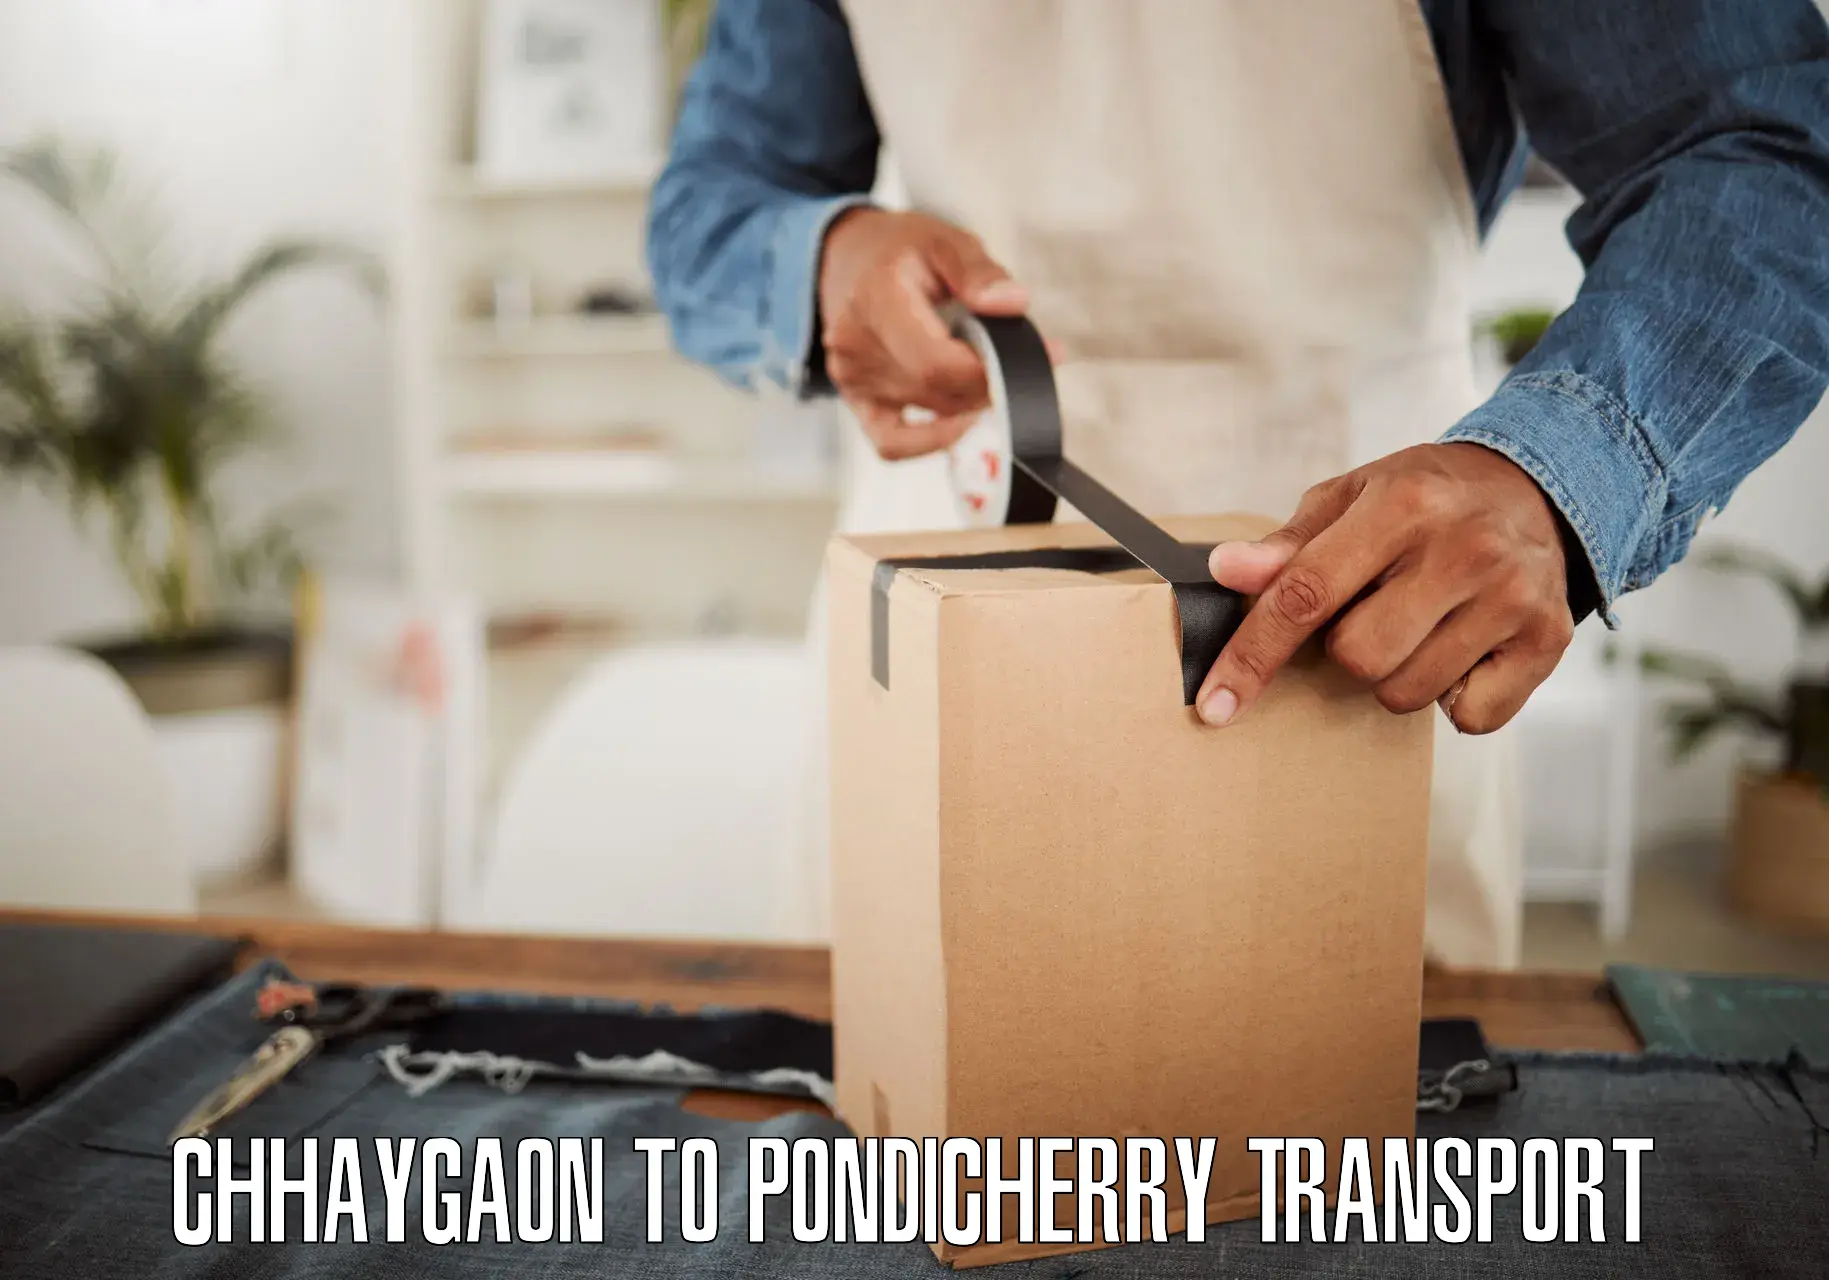 Vehicle transport services in Chhaygaon to Pondicherry University